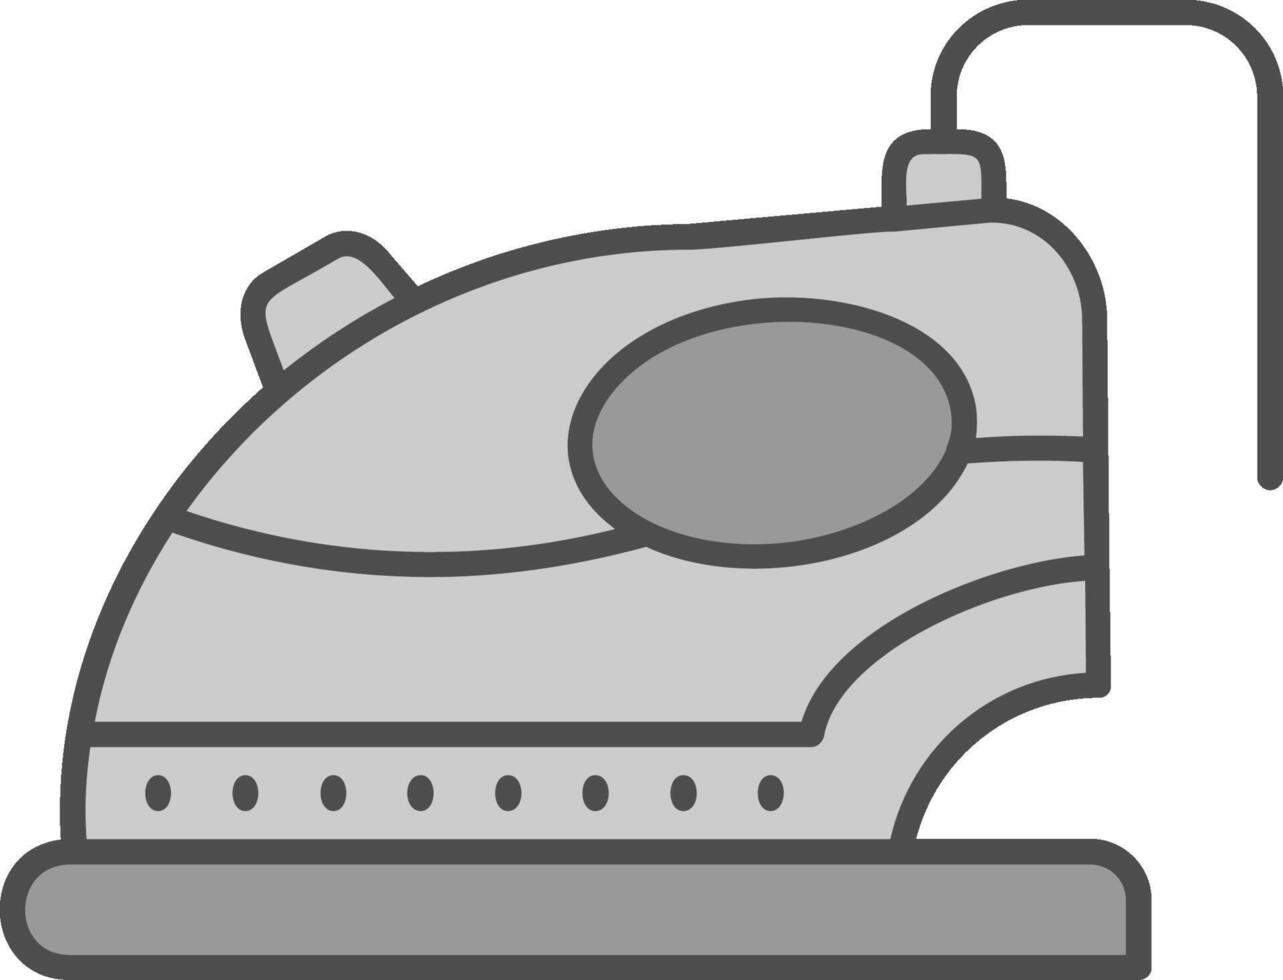 Iron Line Filled Greyscale Icon vector